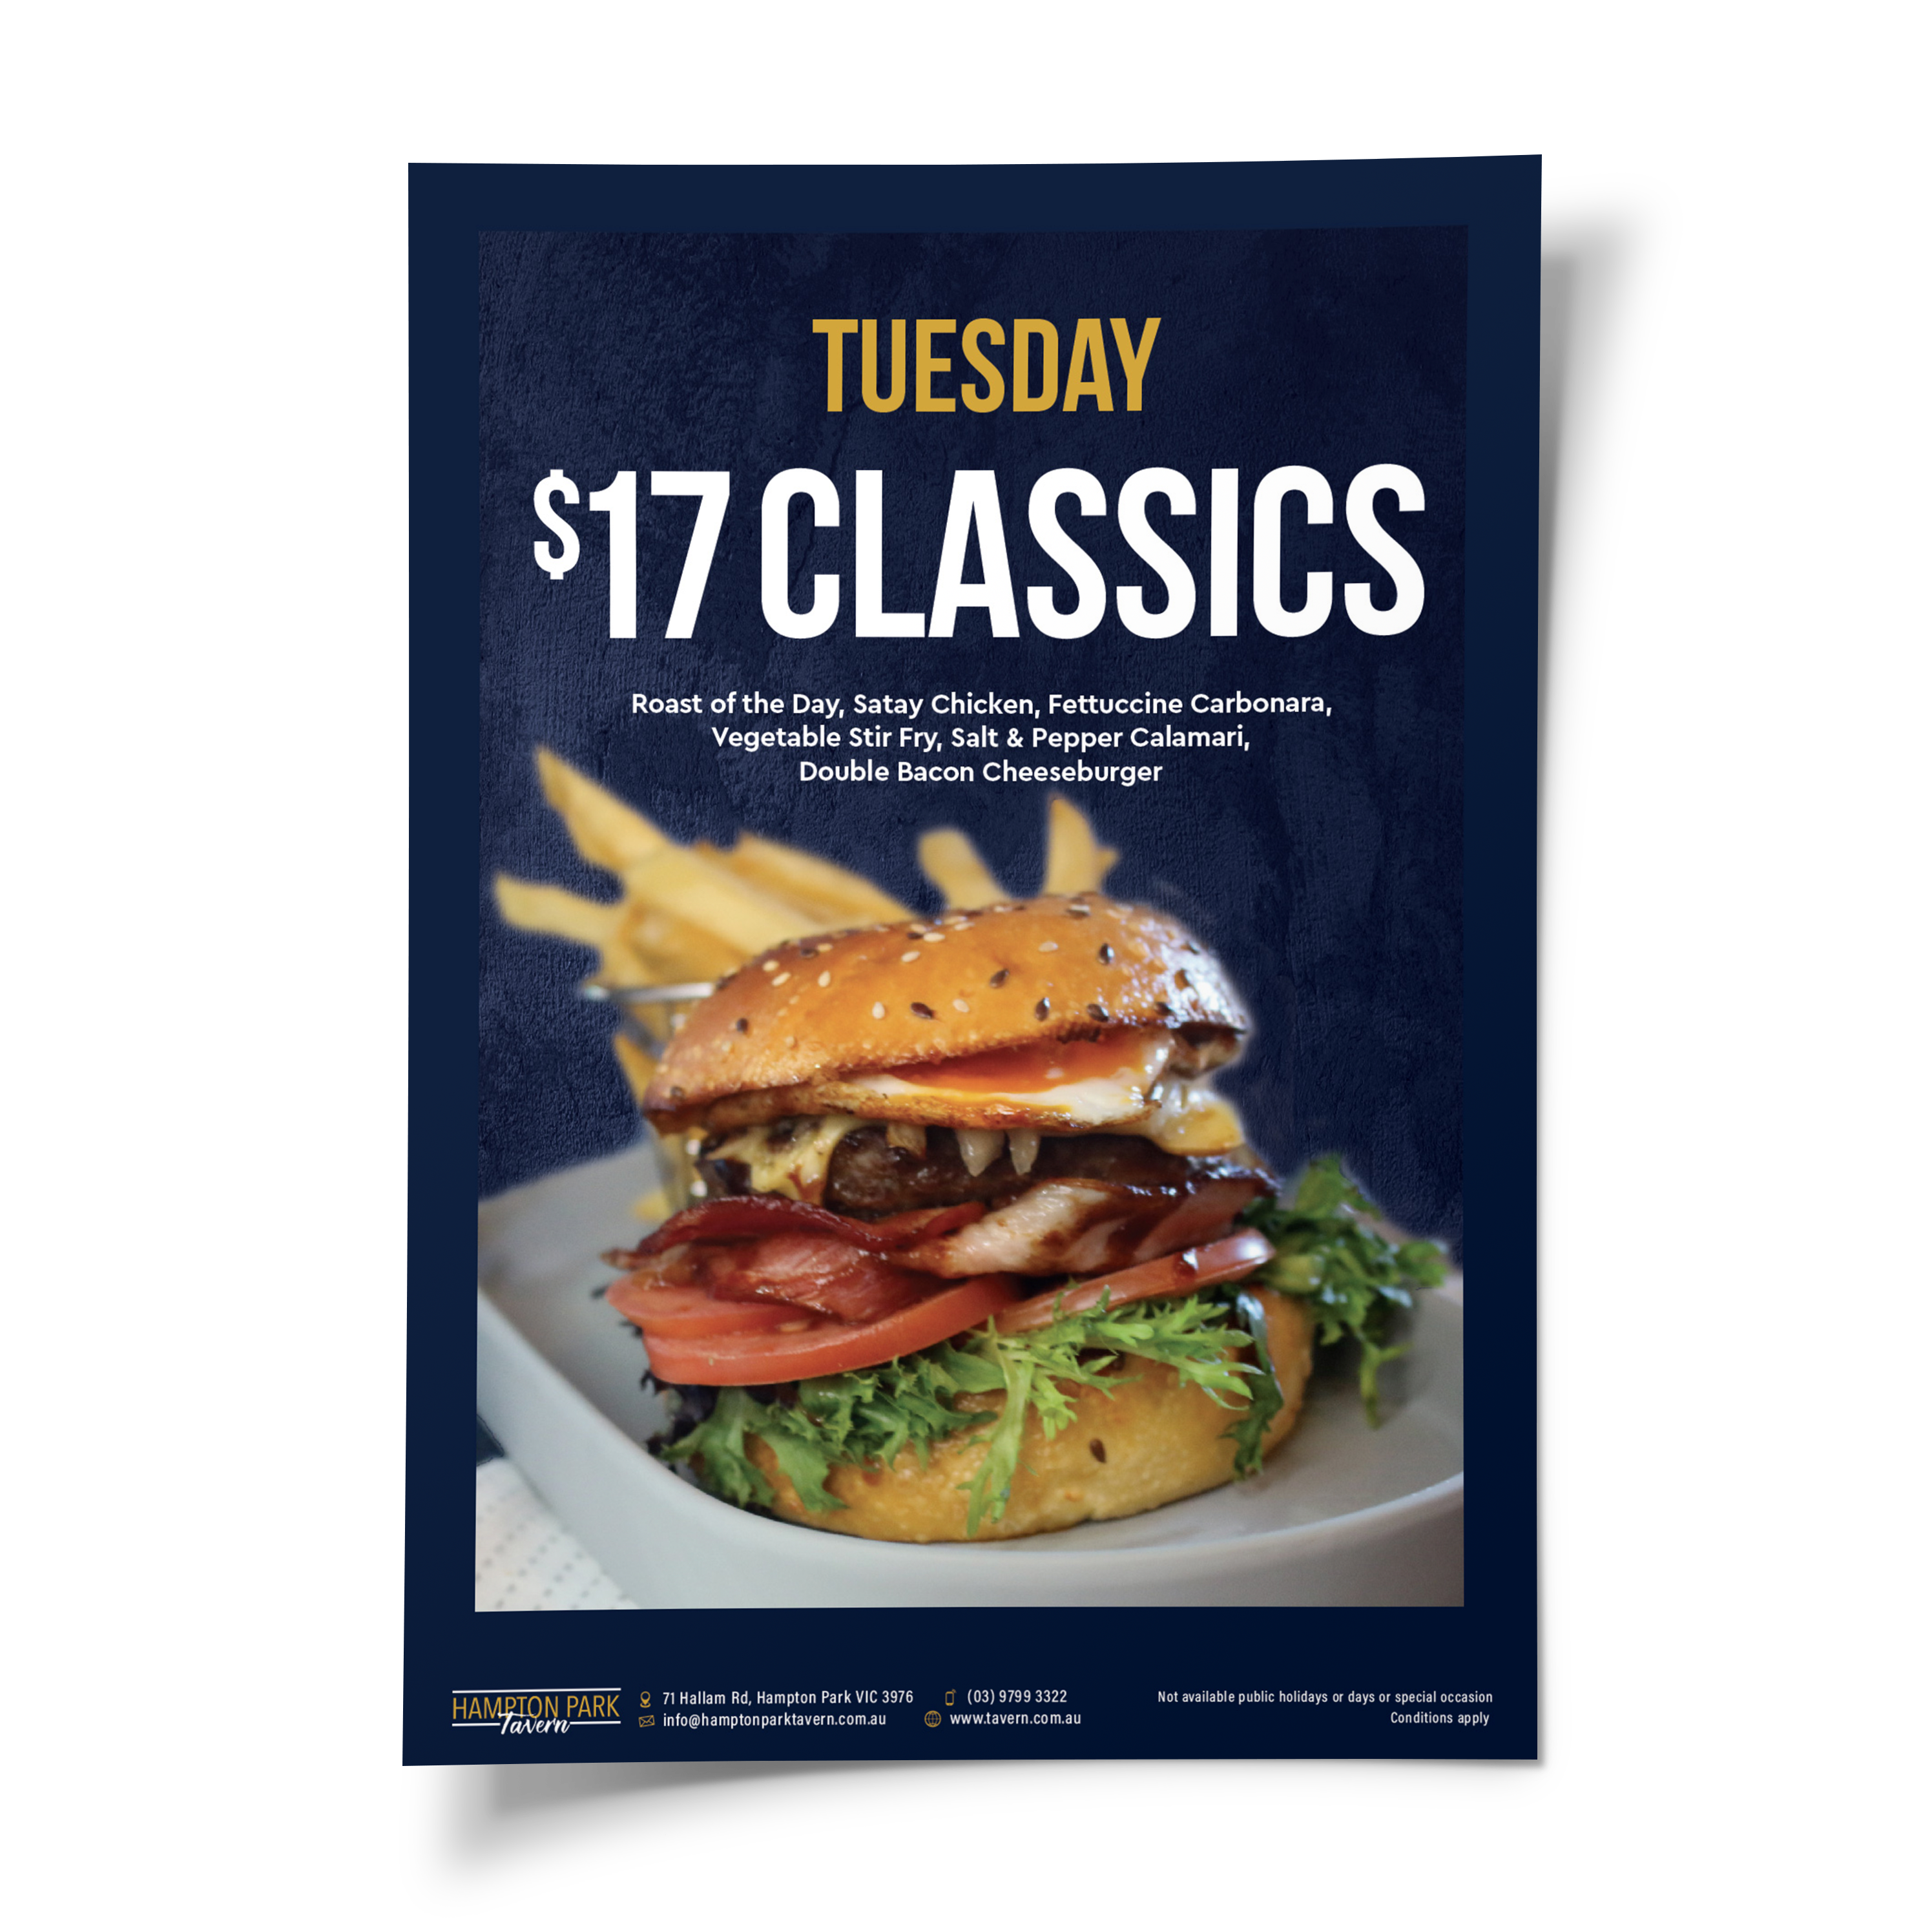 Tuesday $17 Classics Promotion